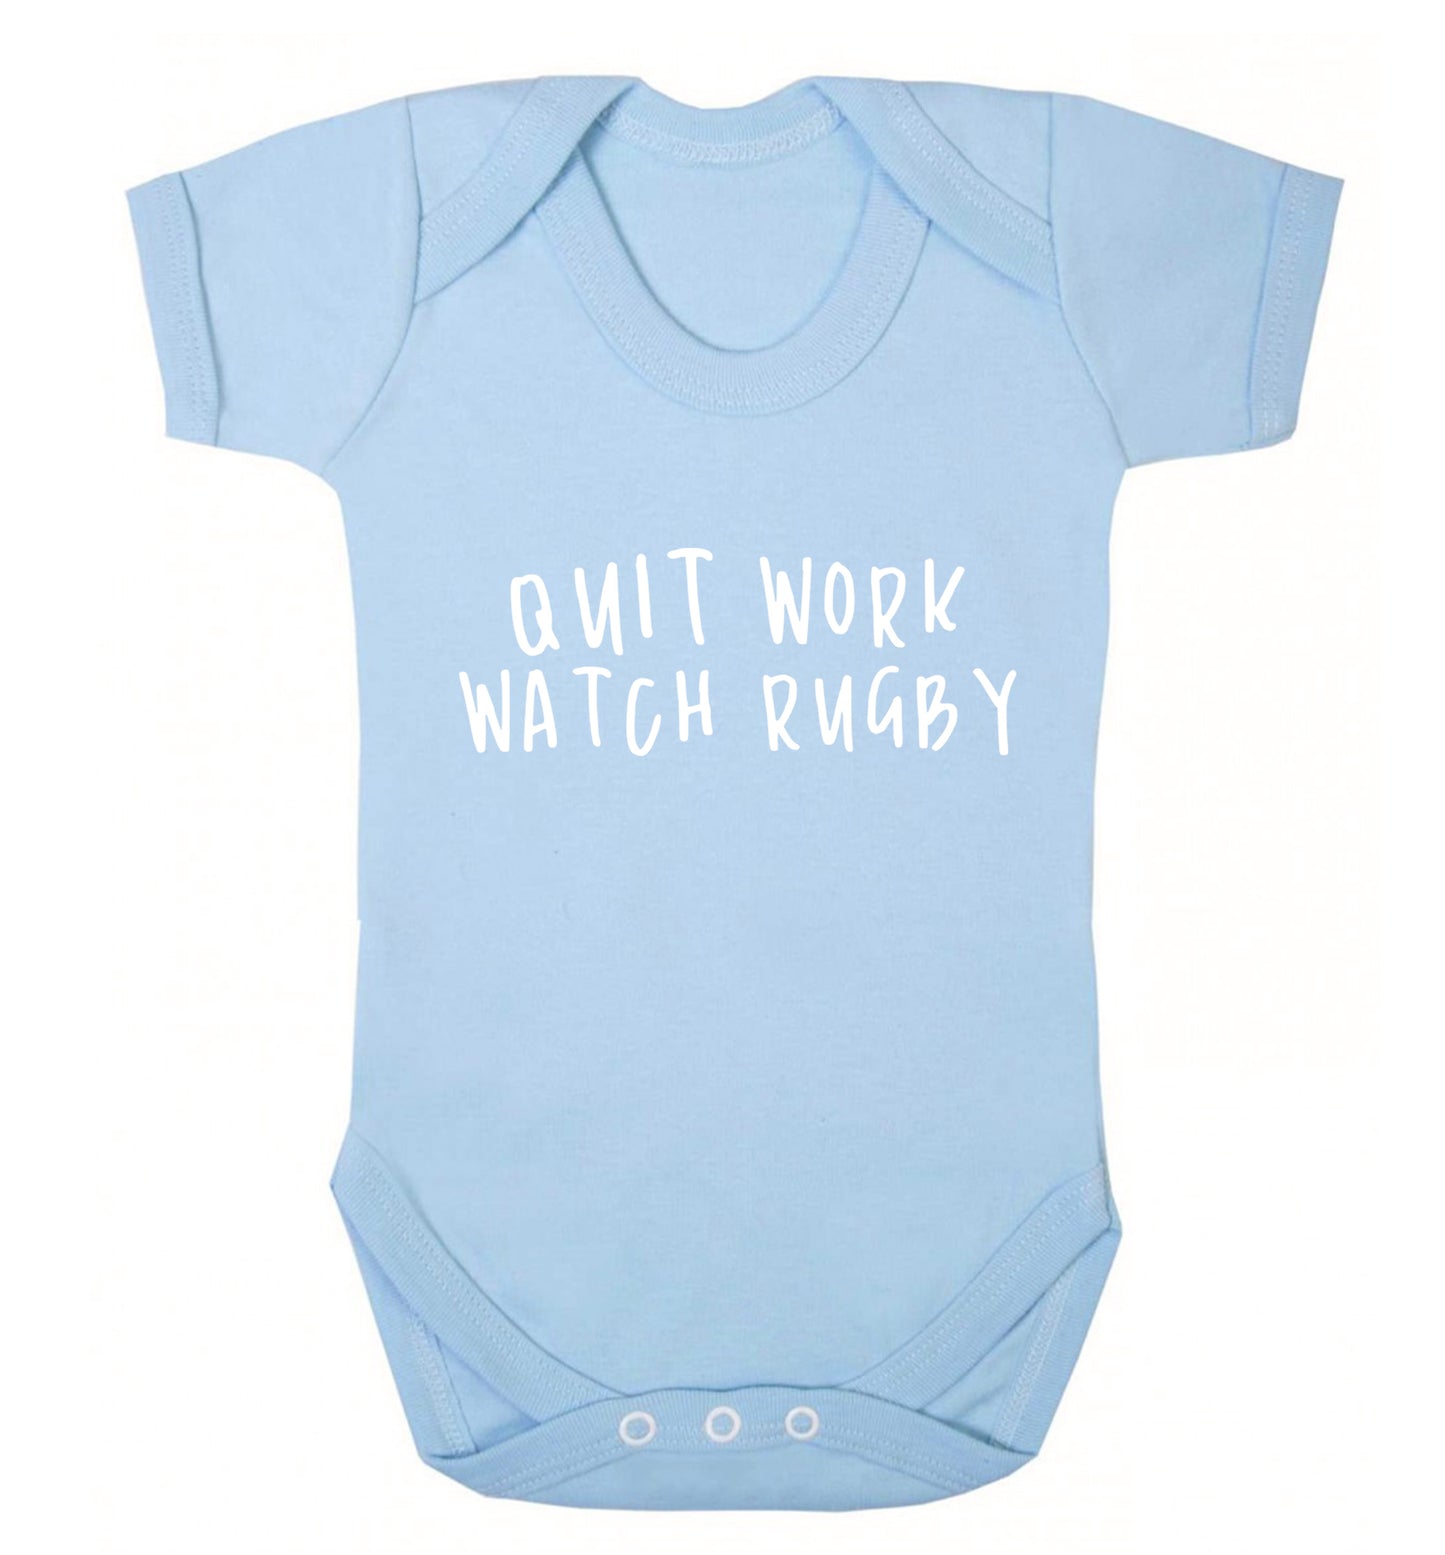 Quit work watch rugby Baby Vest pale blue 18-24 months